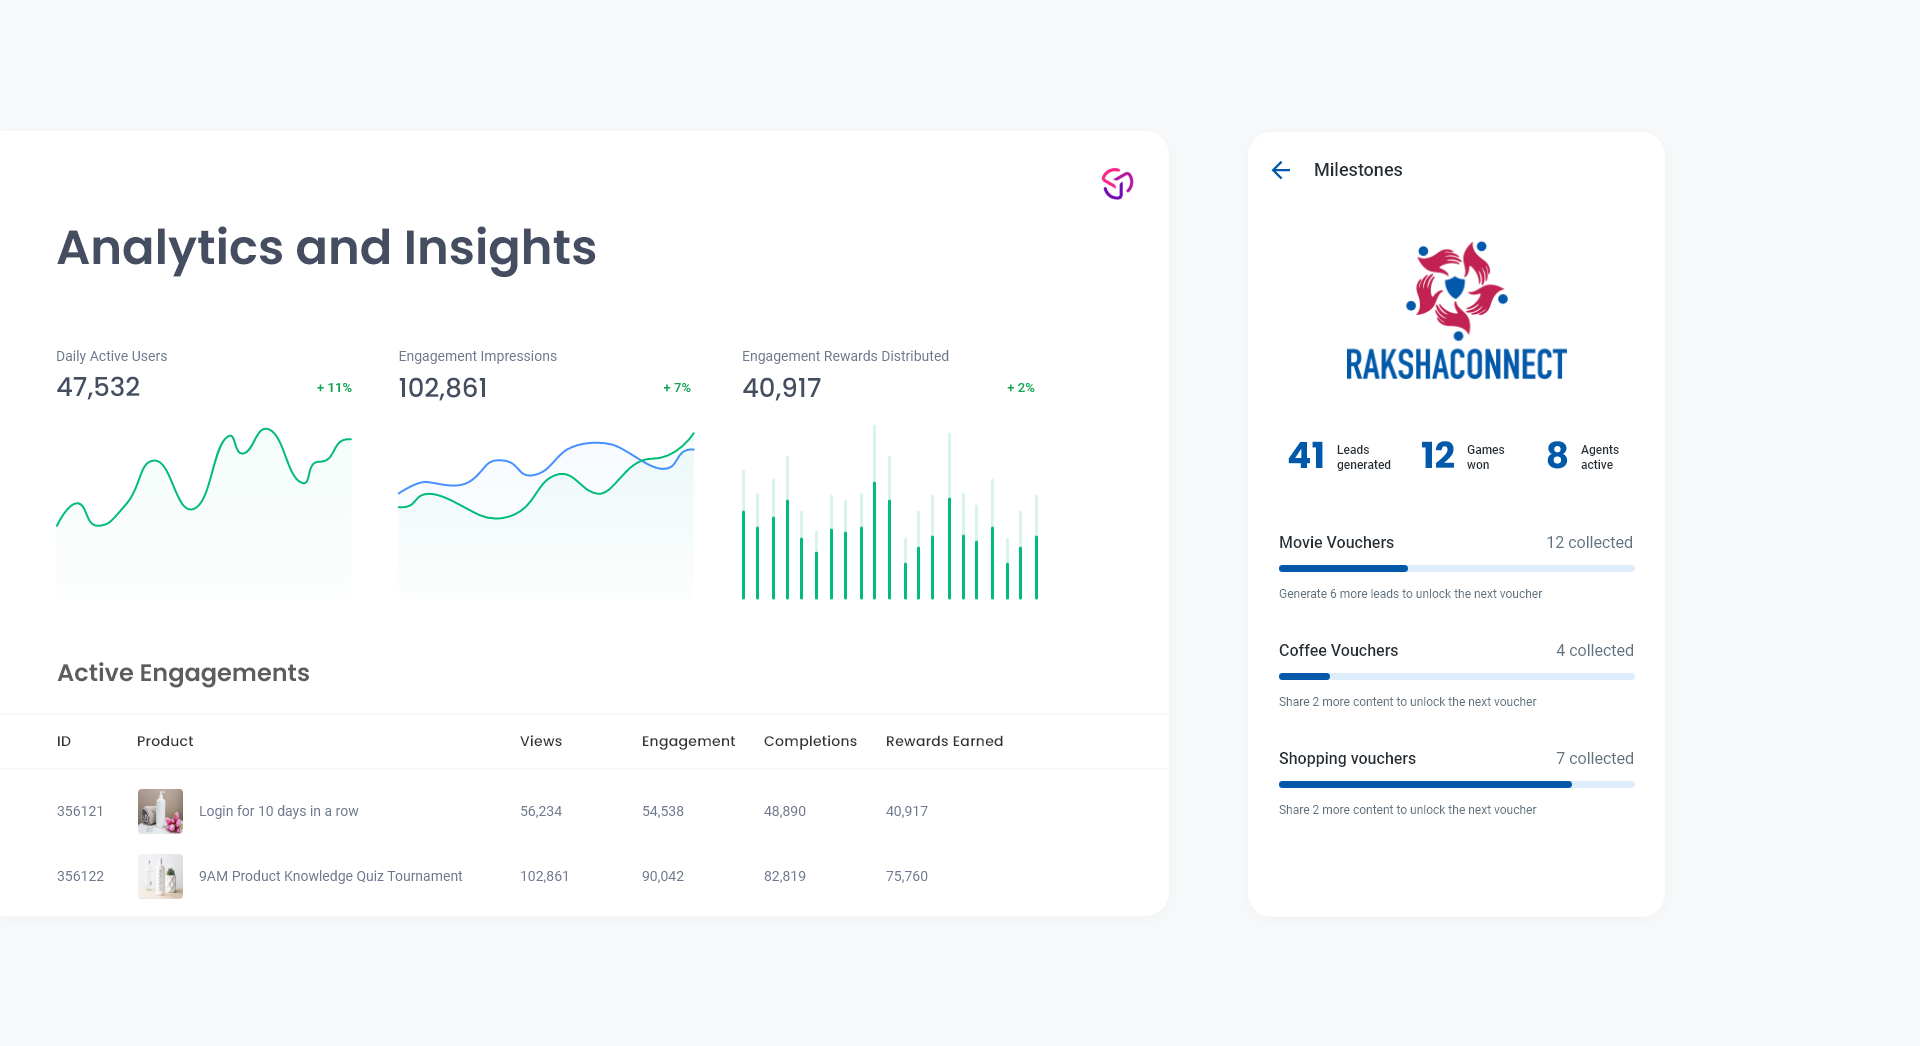 The dashboard provided rich first-party data and insights on user engagement